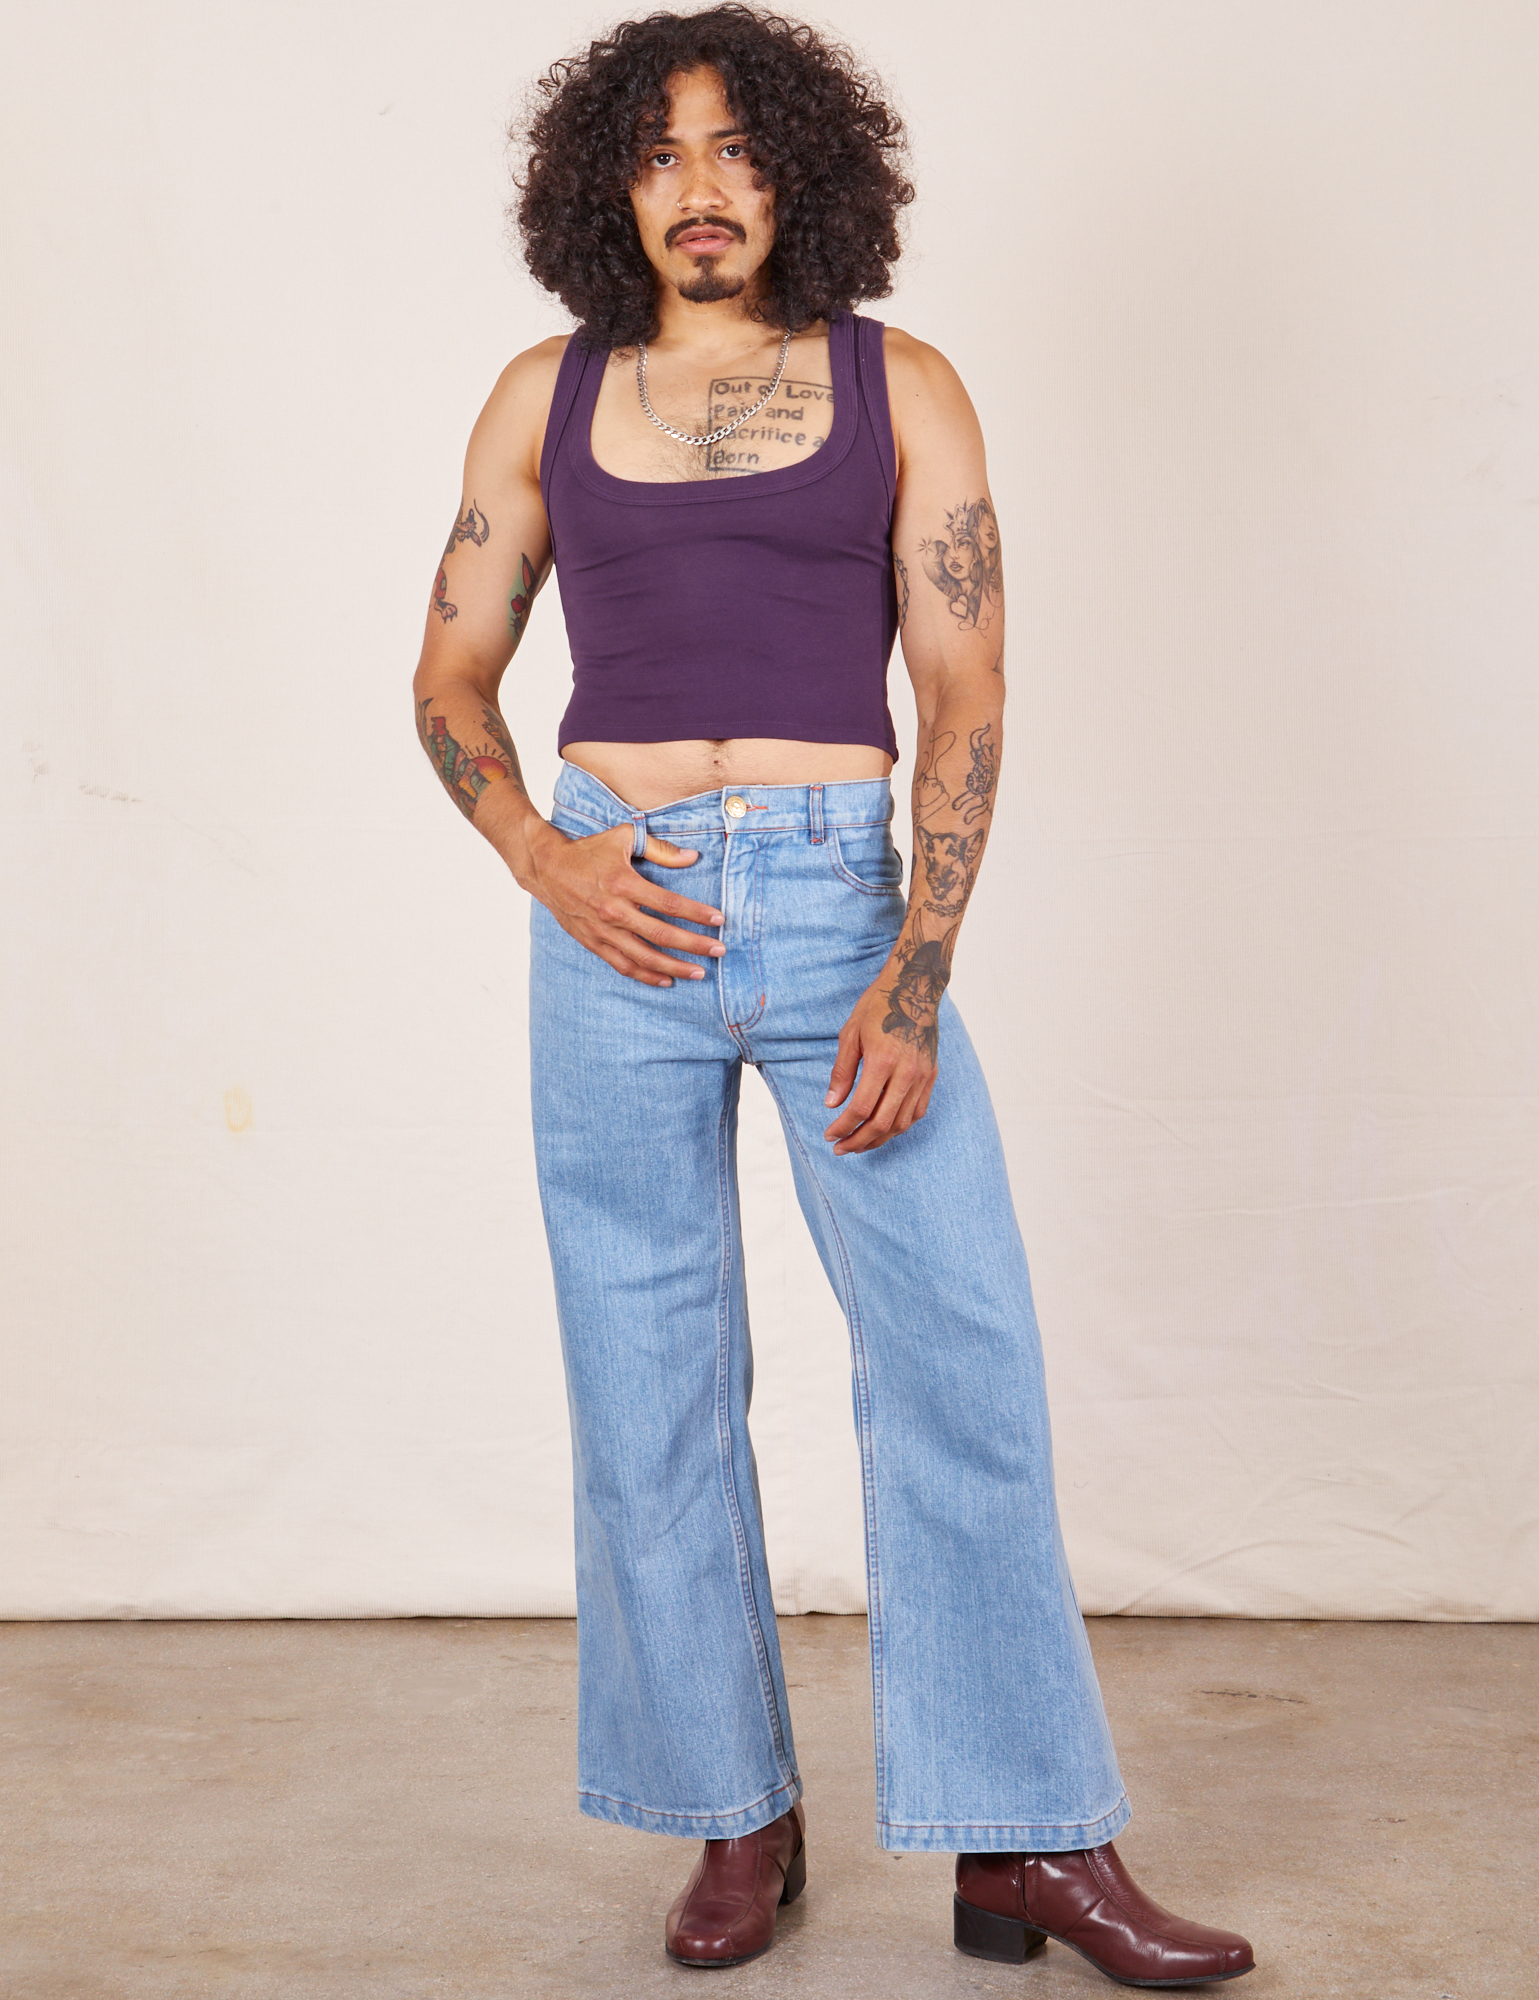 Jesse is wearing Cropped Tank Top in Nebula Purple and light wash Sailor Jeans